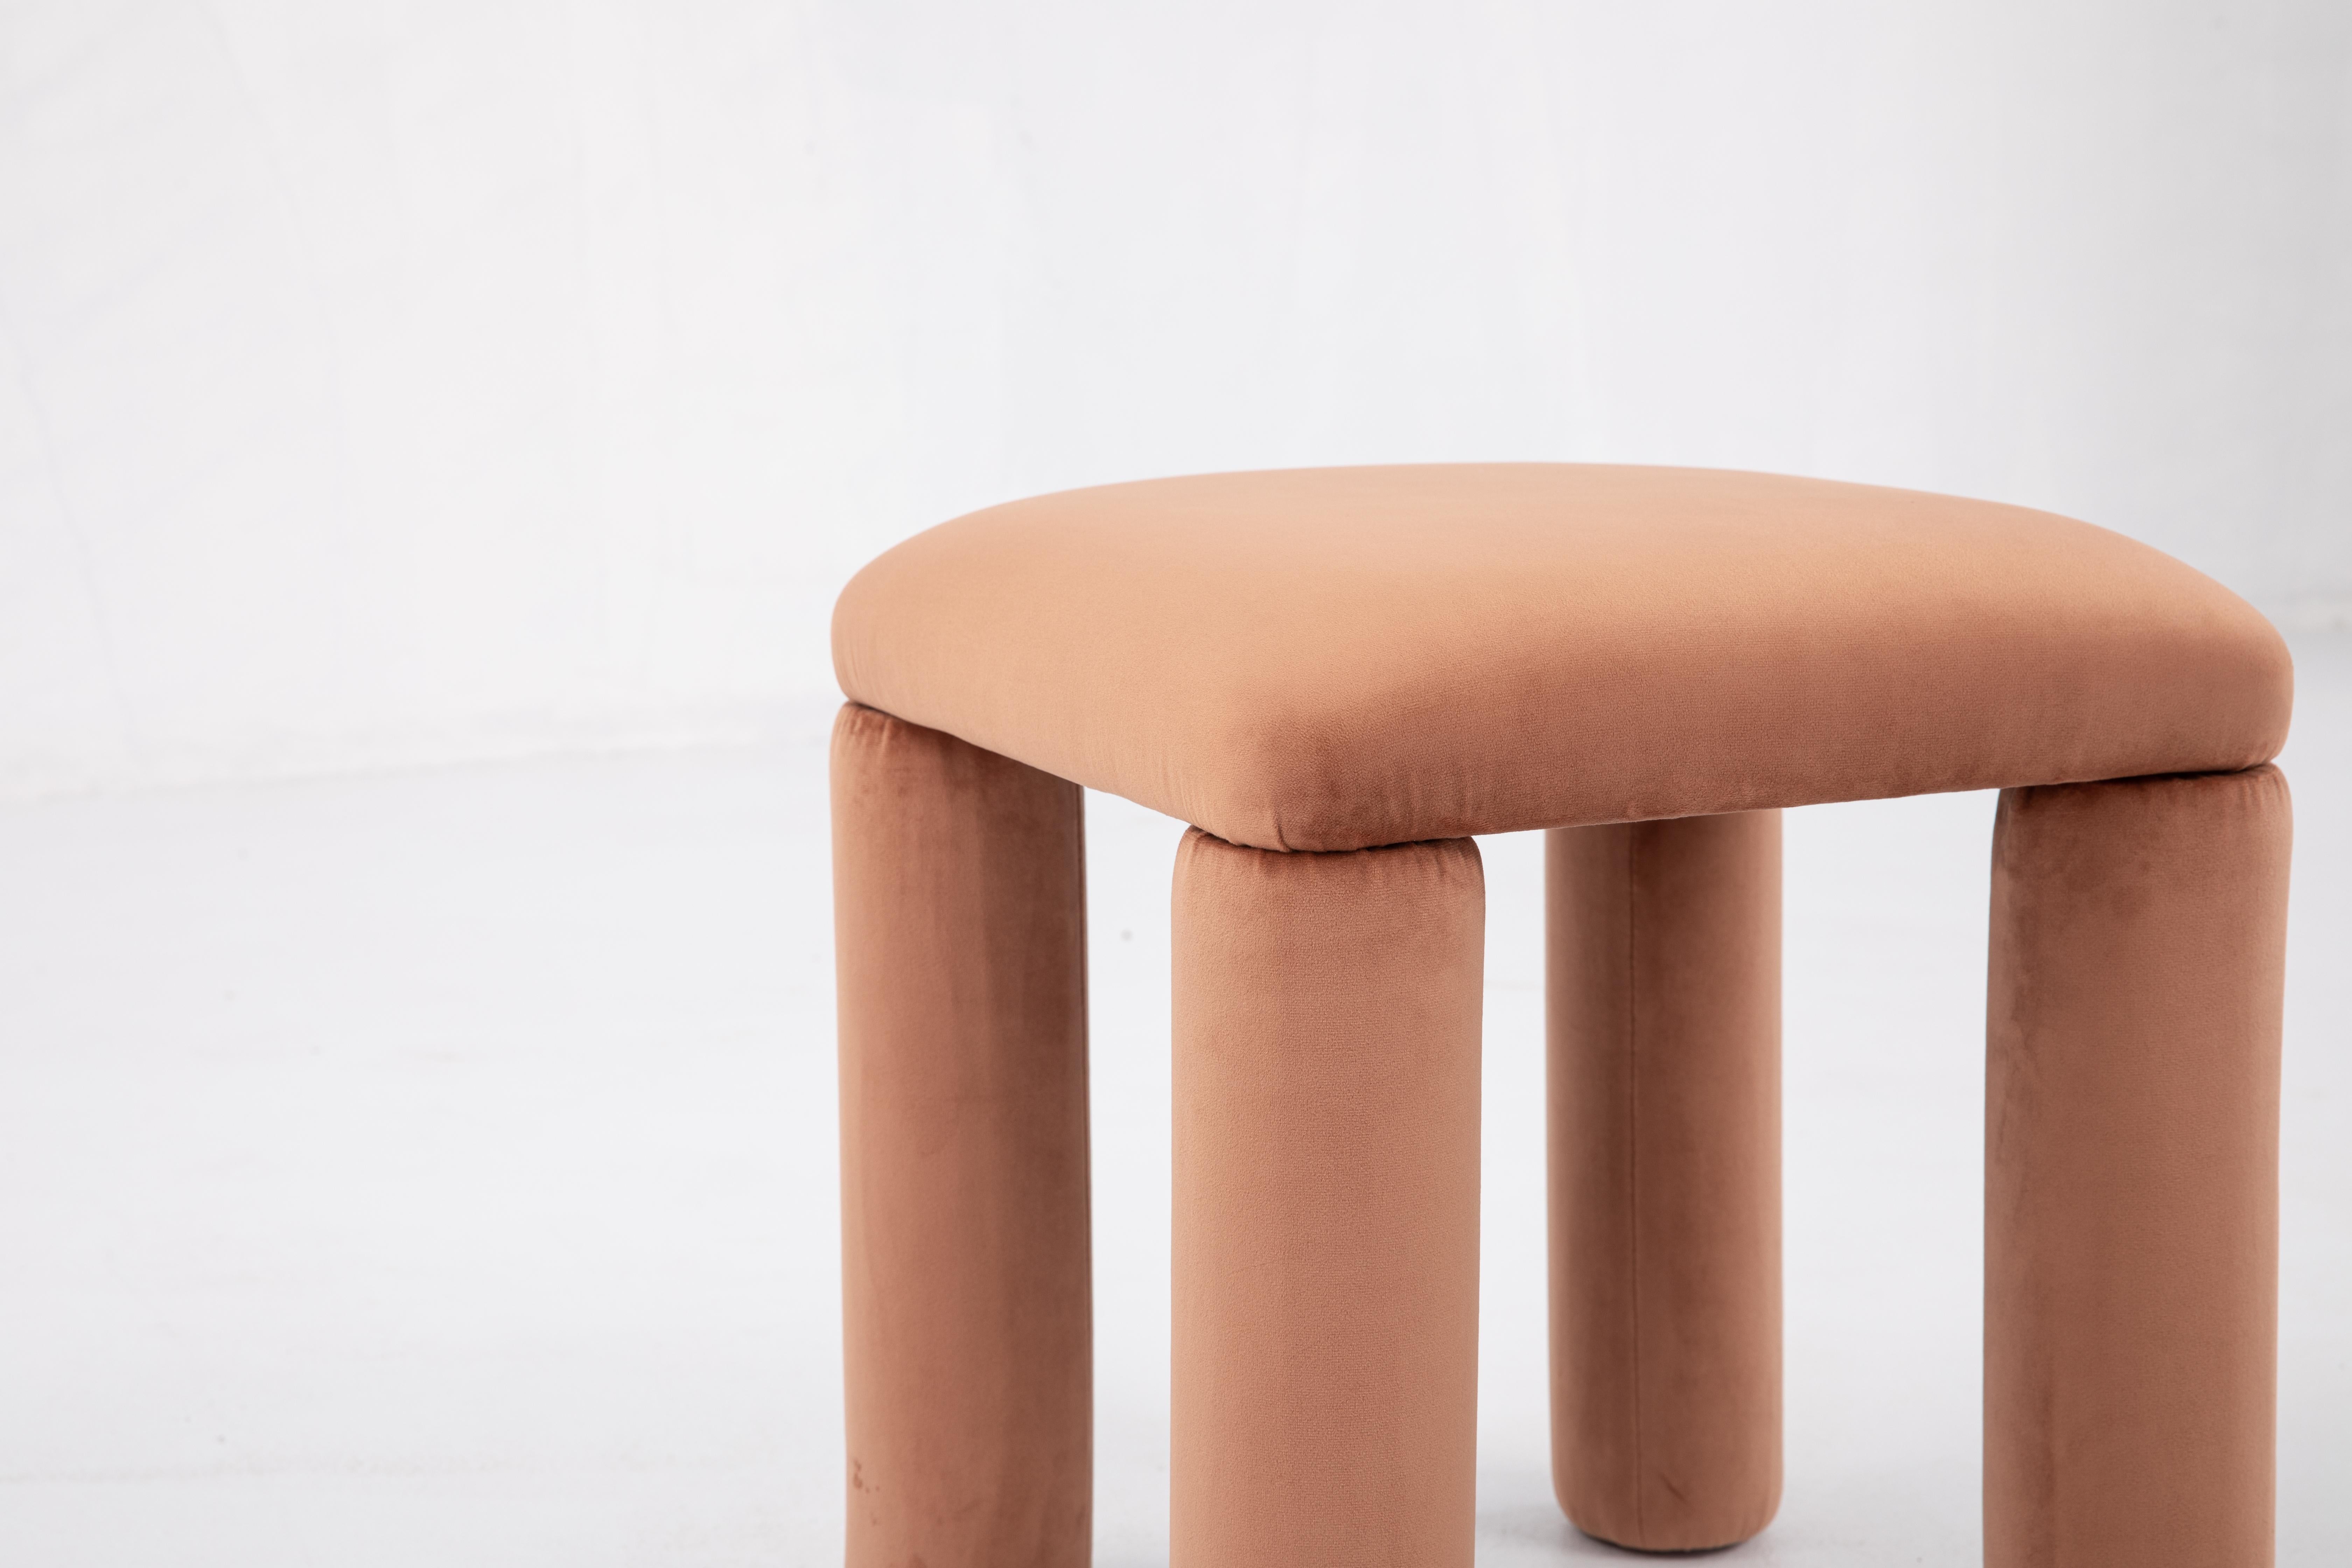 Chinese Temi Stool in Teja by Sun at Six, Minimalist Velvet Stool For Sale